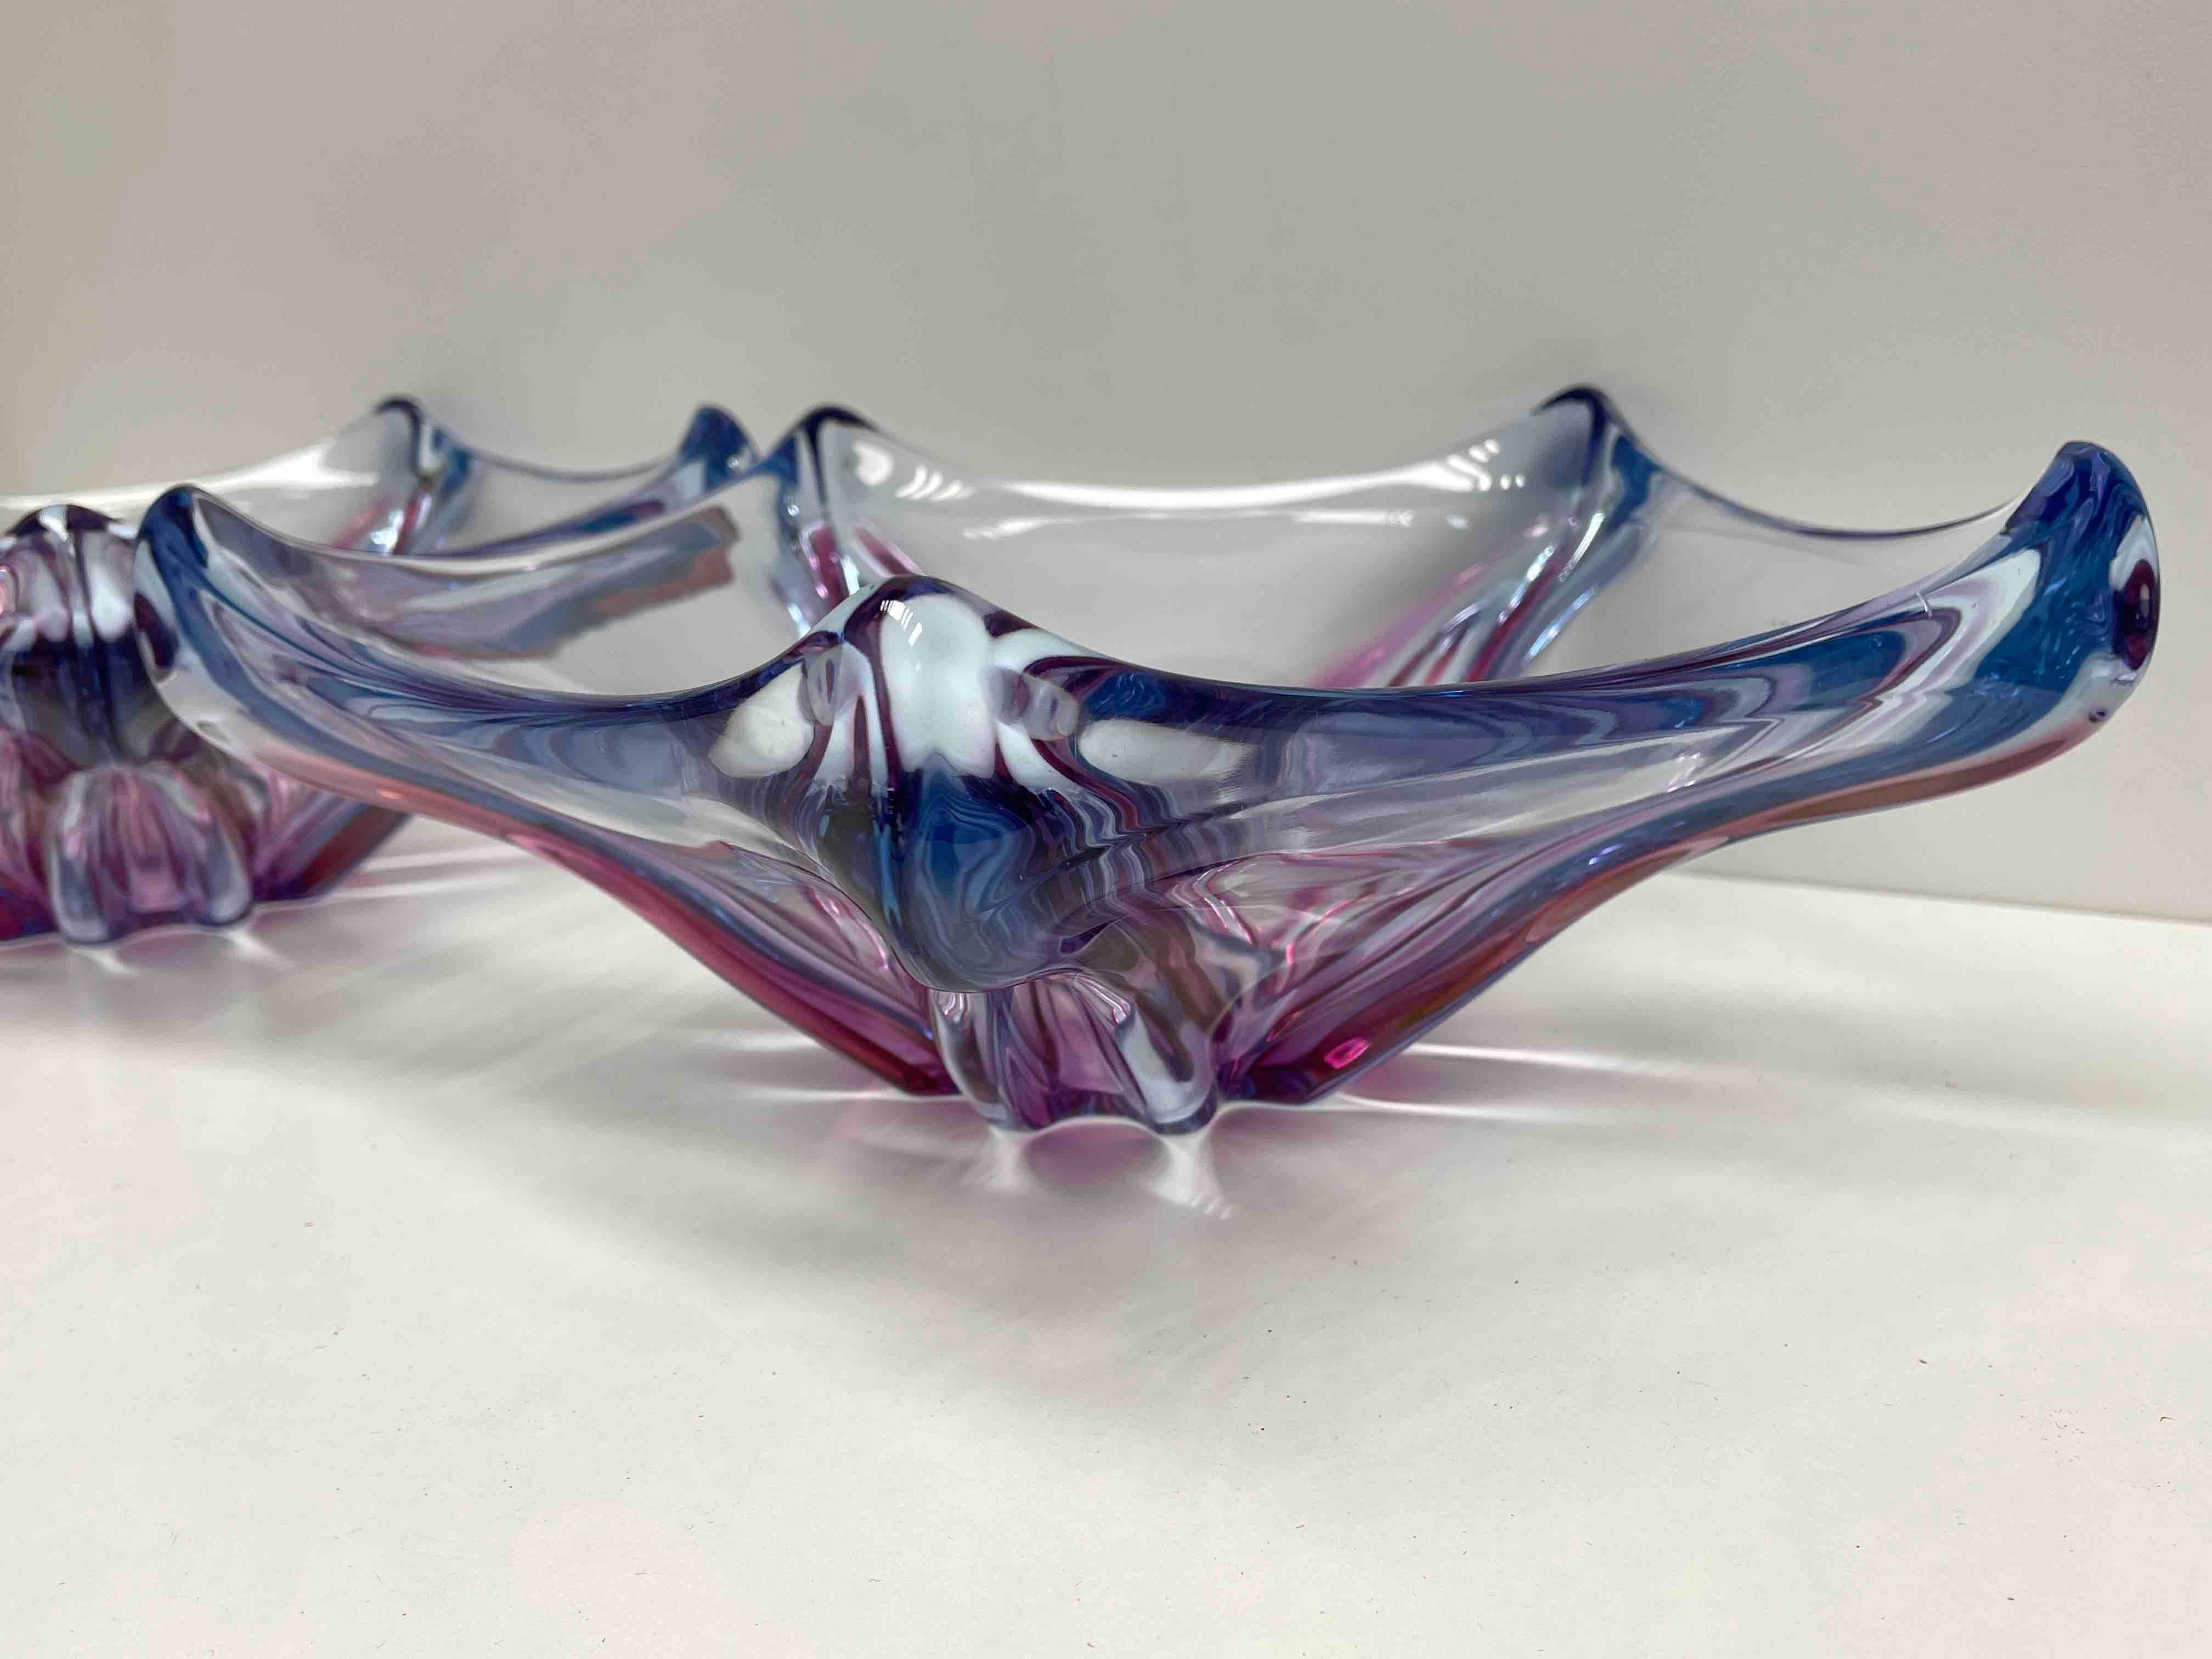 Gorgeous Pair of Murano Art Glass Sommerso Fruit Bowls Vintage, Italy 1